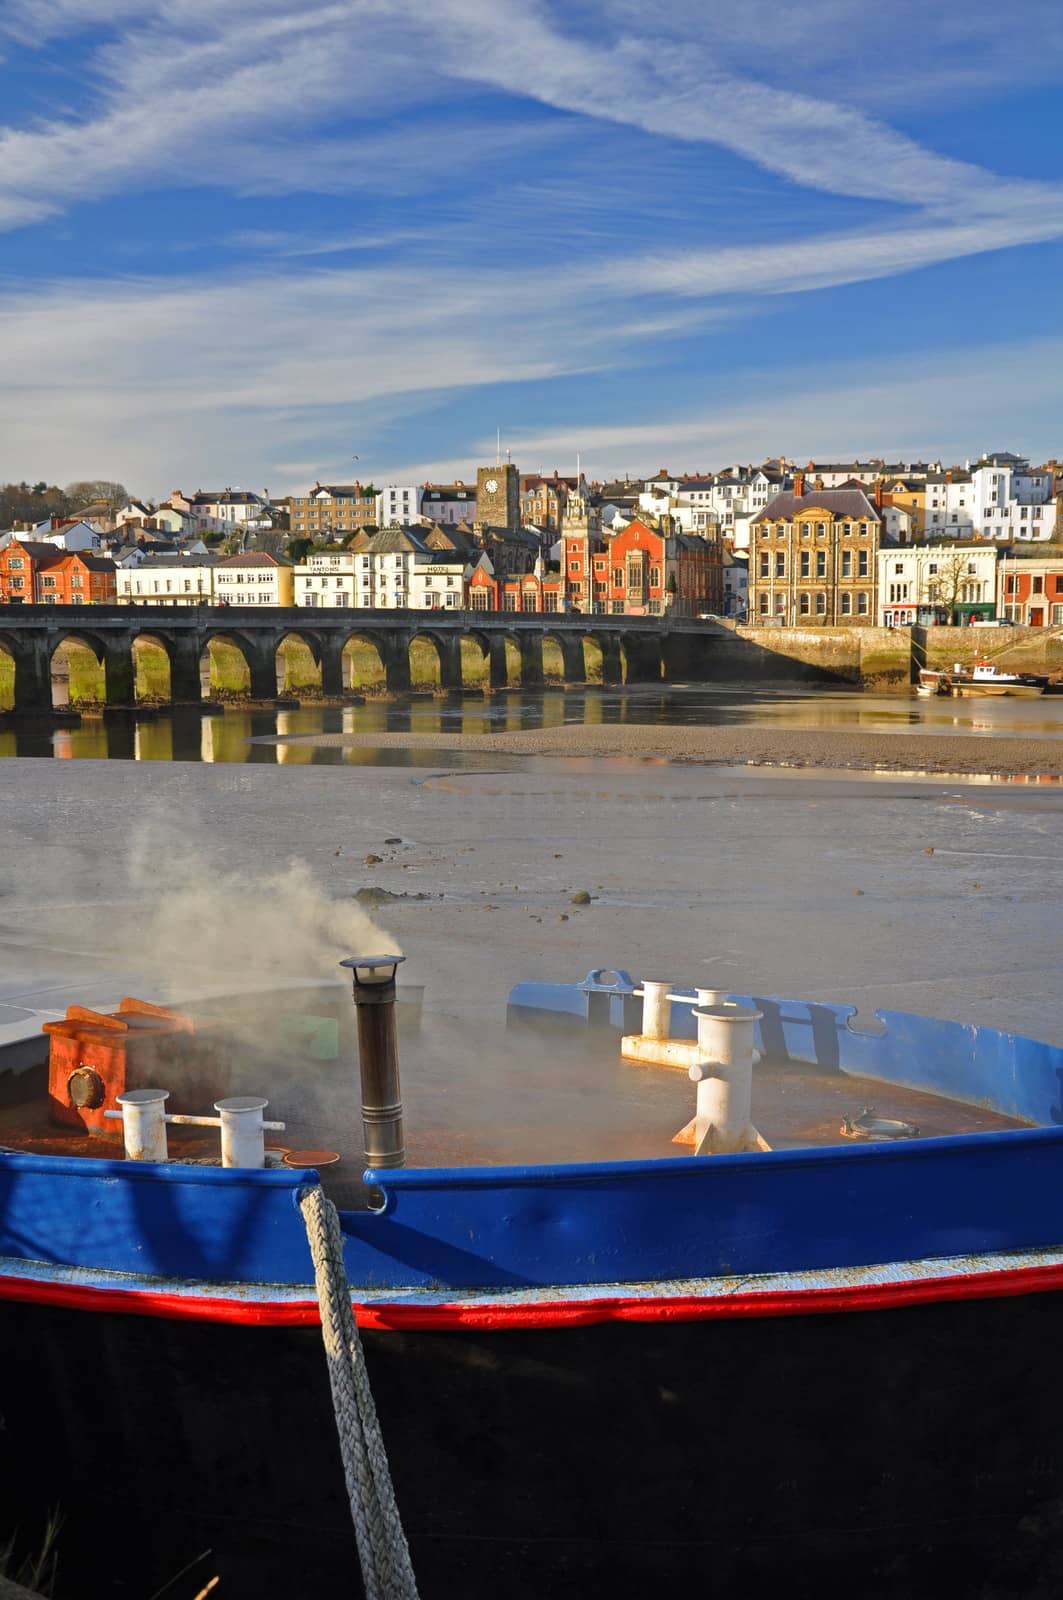 An old boat berthed at Wooda Wharfe, on the River Torridge. The old bridge which crosses the River Torridge is shown together with the ancient port of Bideford. Bideford is in North Devon, England